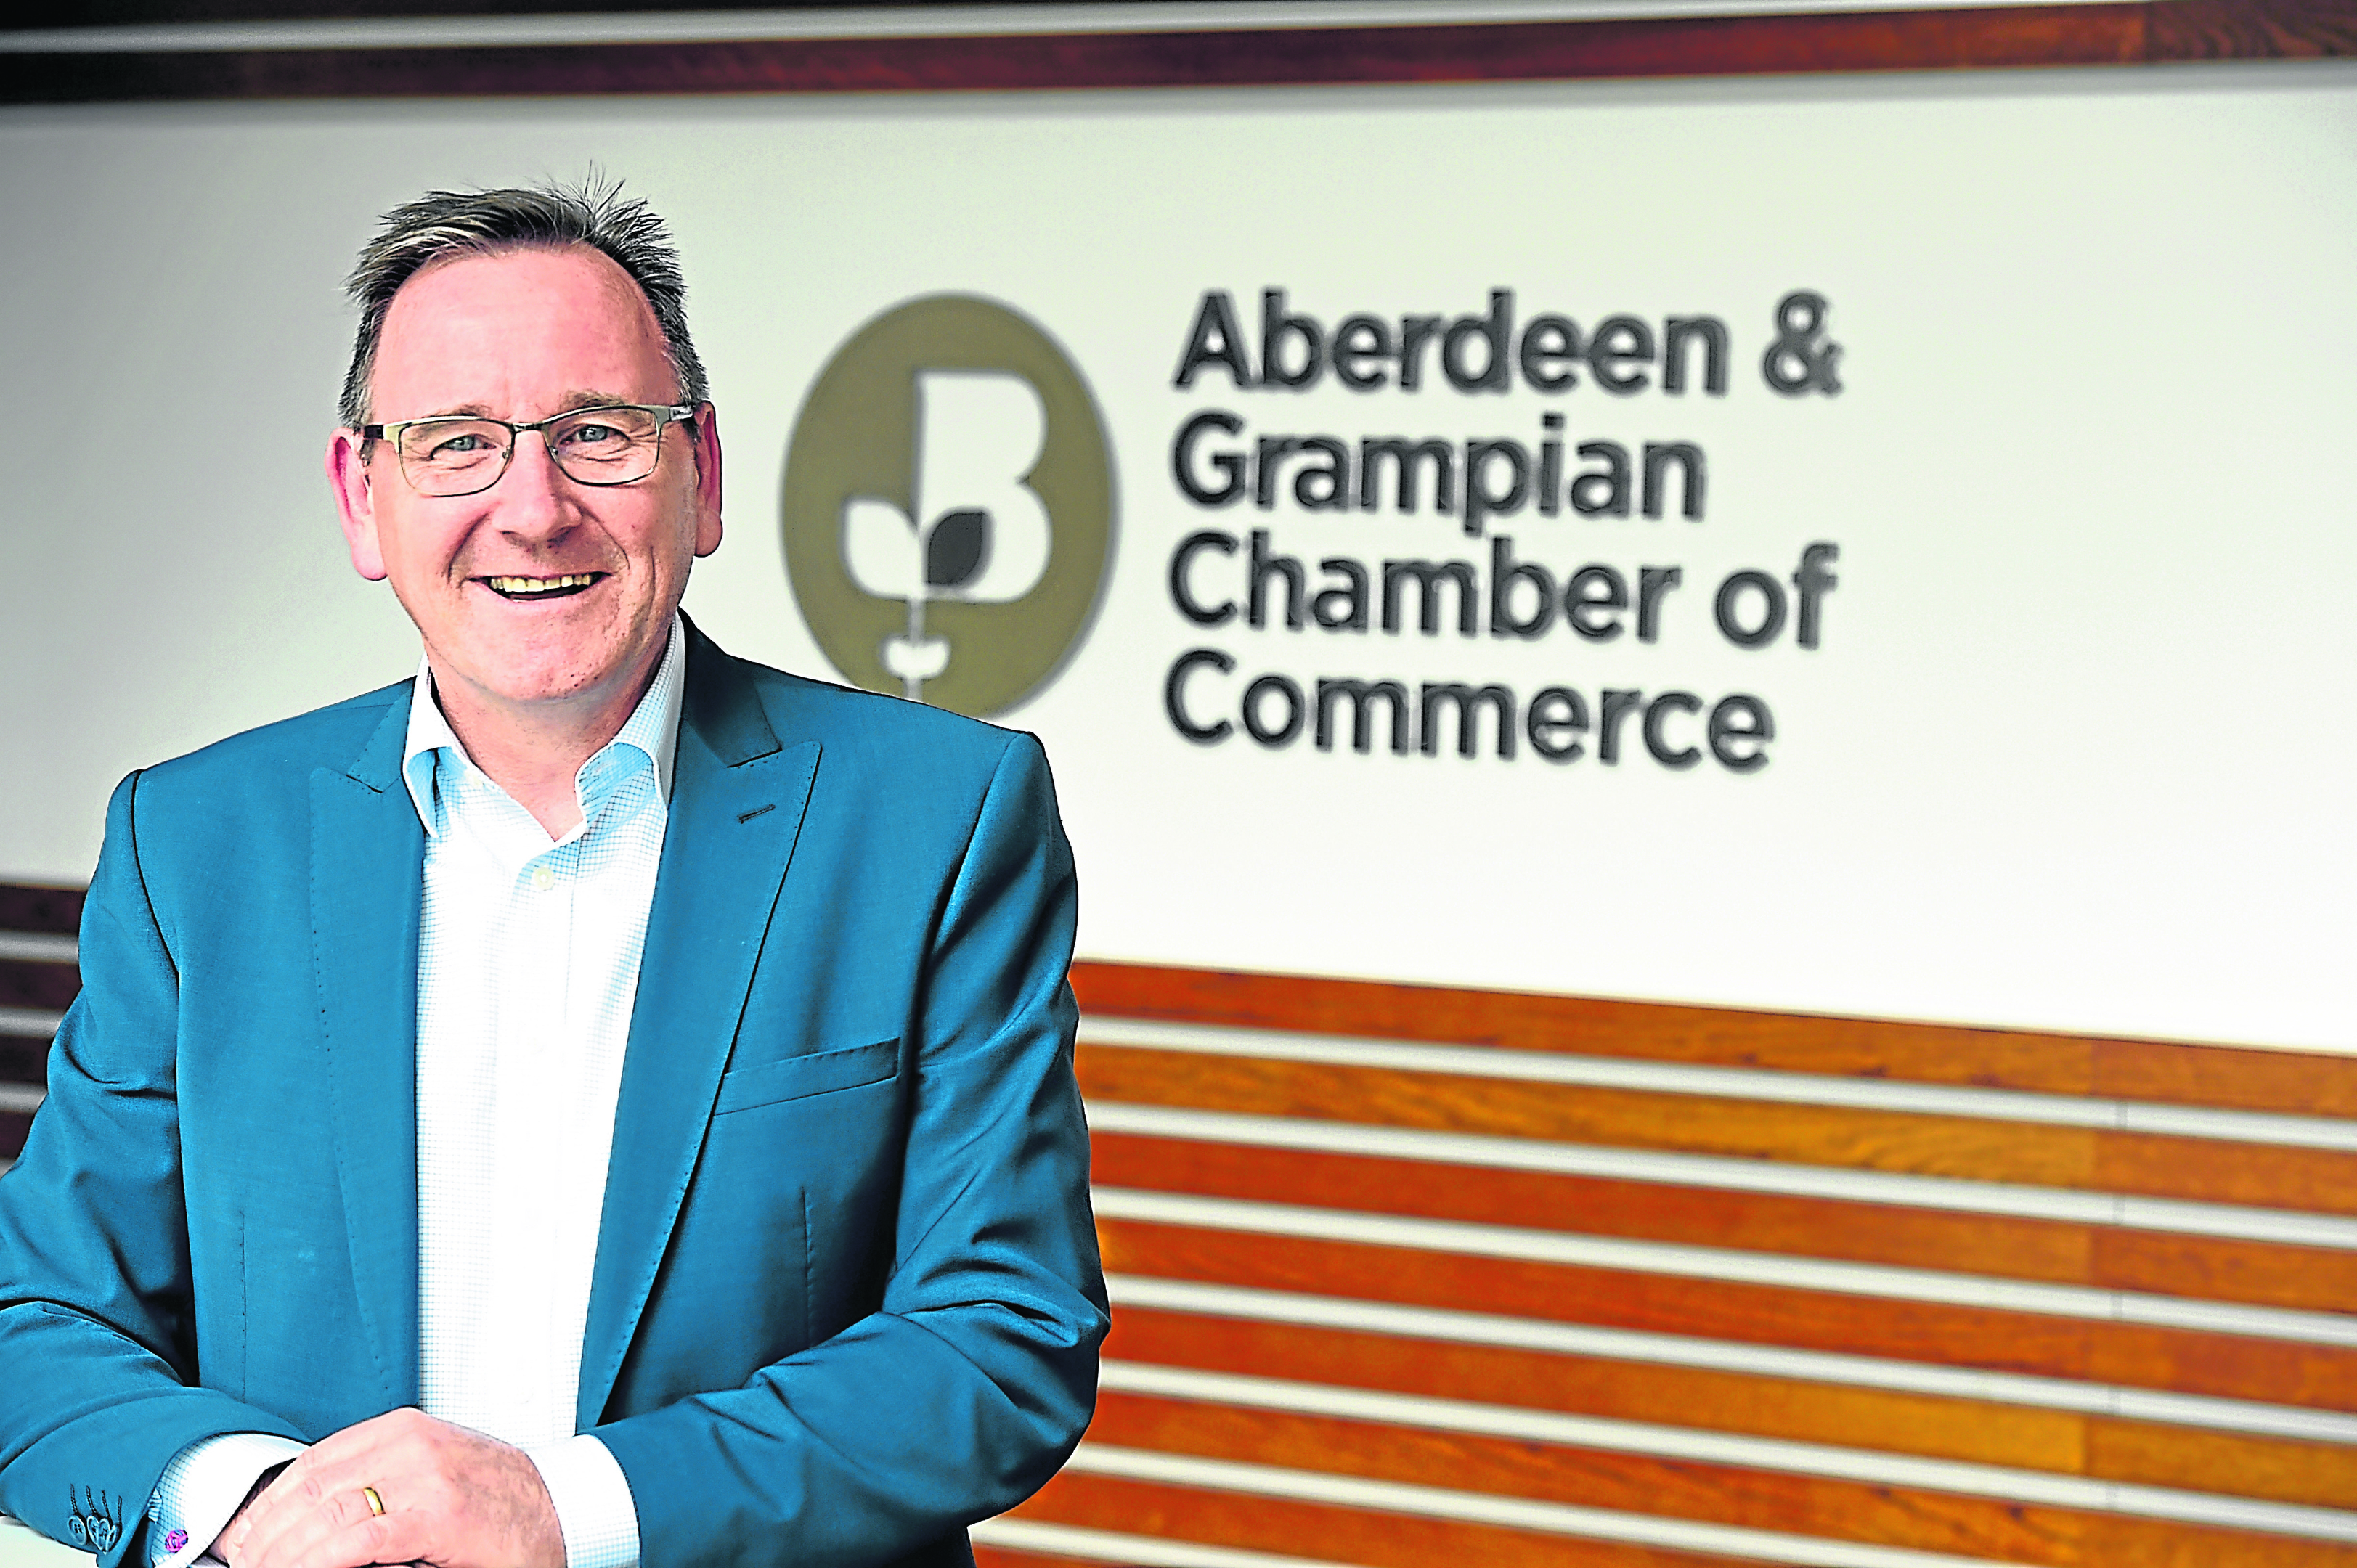 Liam Smyth has moved on from his role as Membership Director at Aberdeen and Grampian Chamber of Commerce.